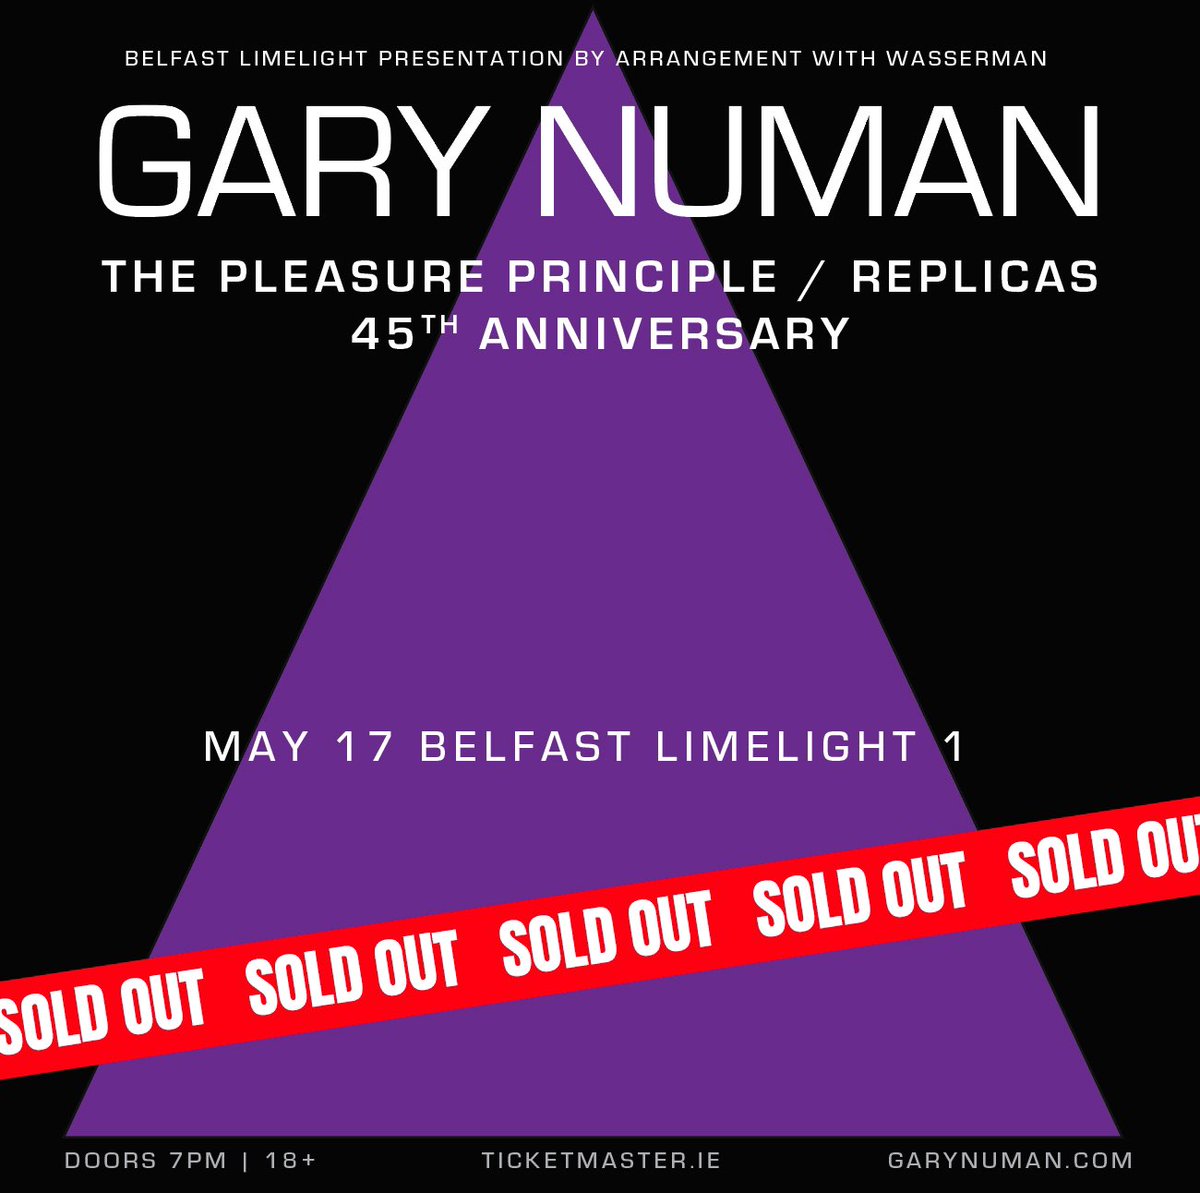 Tonights tour opening show in Belfast is Sold Out. Looking forward to it!!